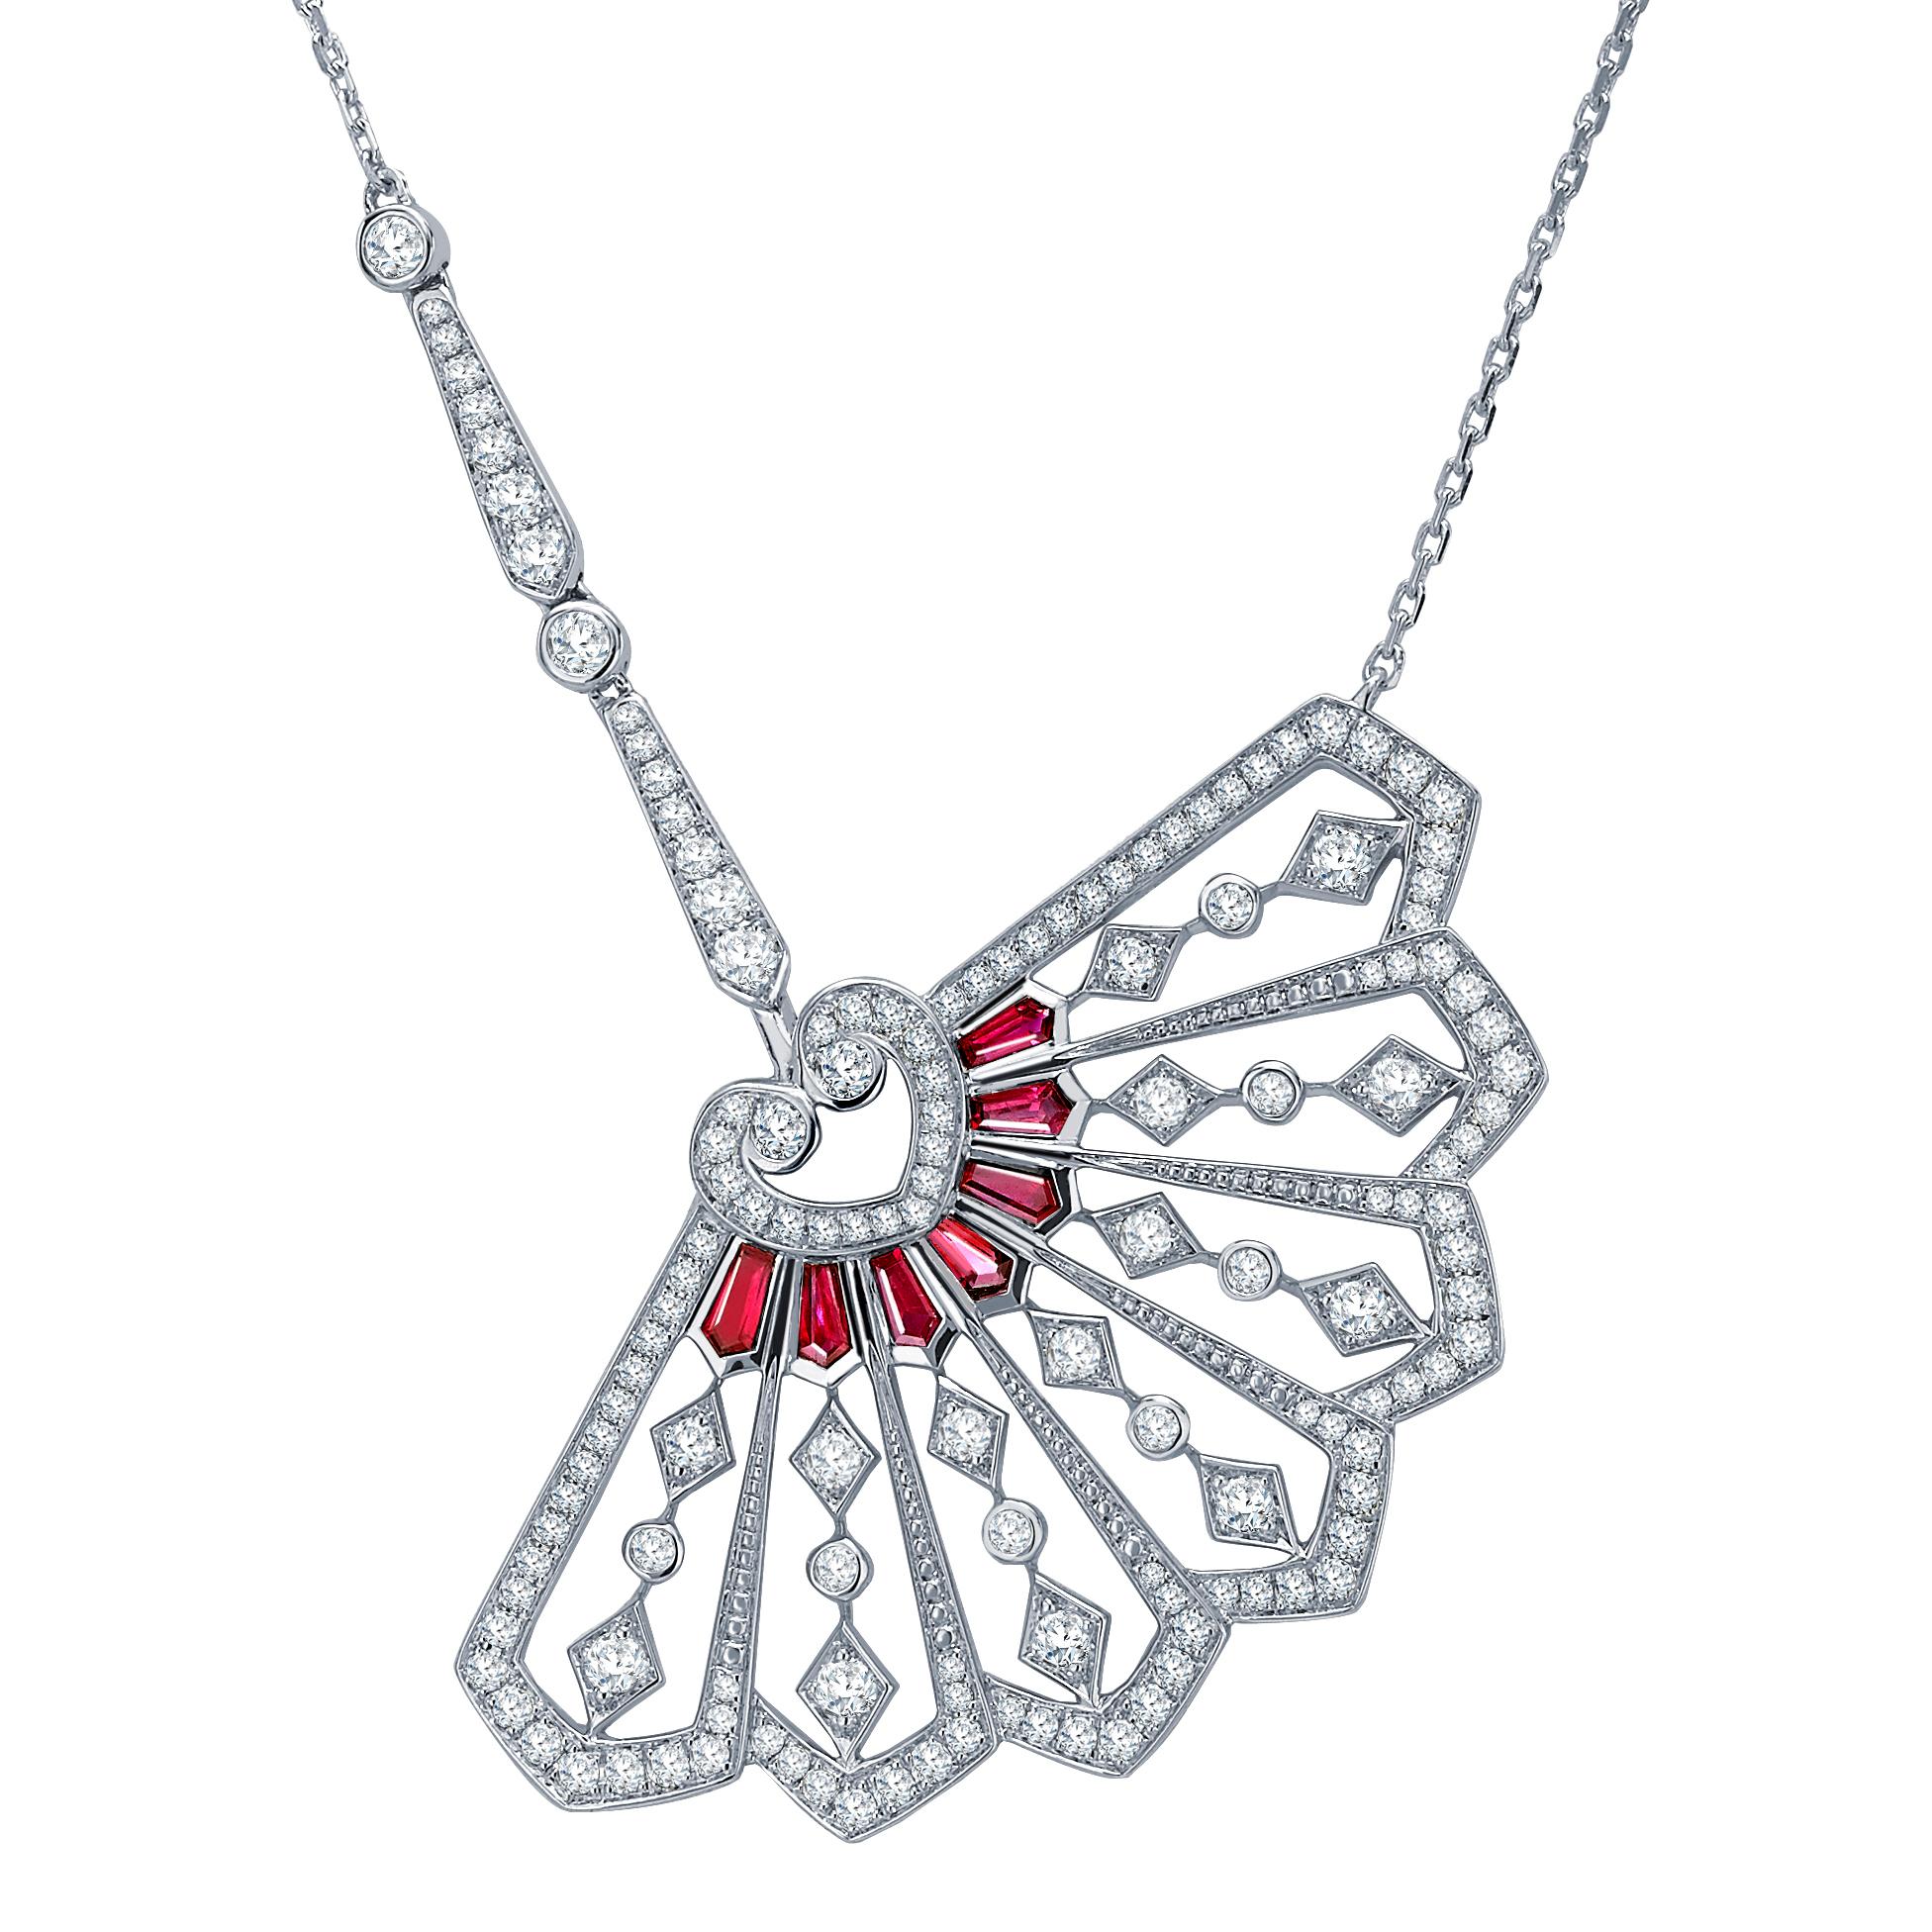 A House of Garrard 18 karat white gold pendant from the 'Fanfare' collection, set with round white diamonds and calibre cut rubies. The total length of the pendant is 42cm. 

143 round white diamonds weighing 1.29 carats
7 calibre cut rubies